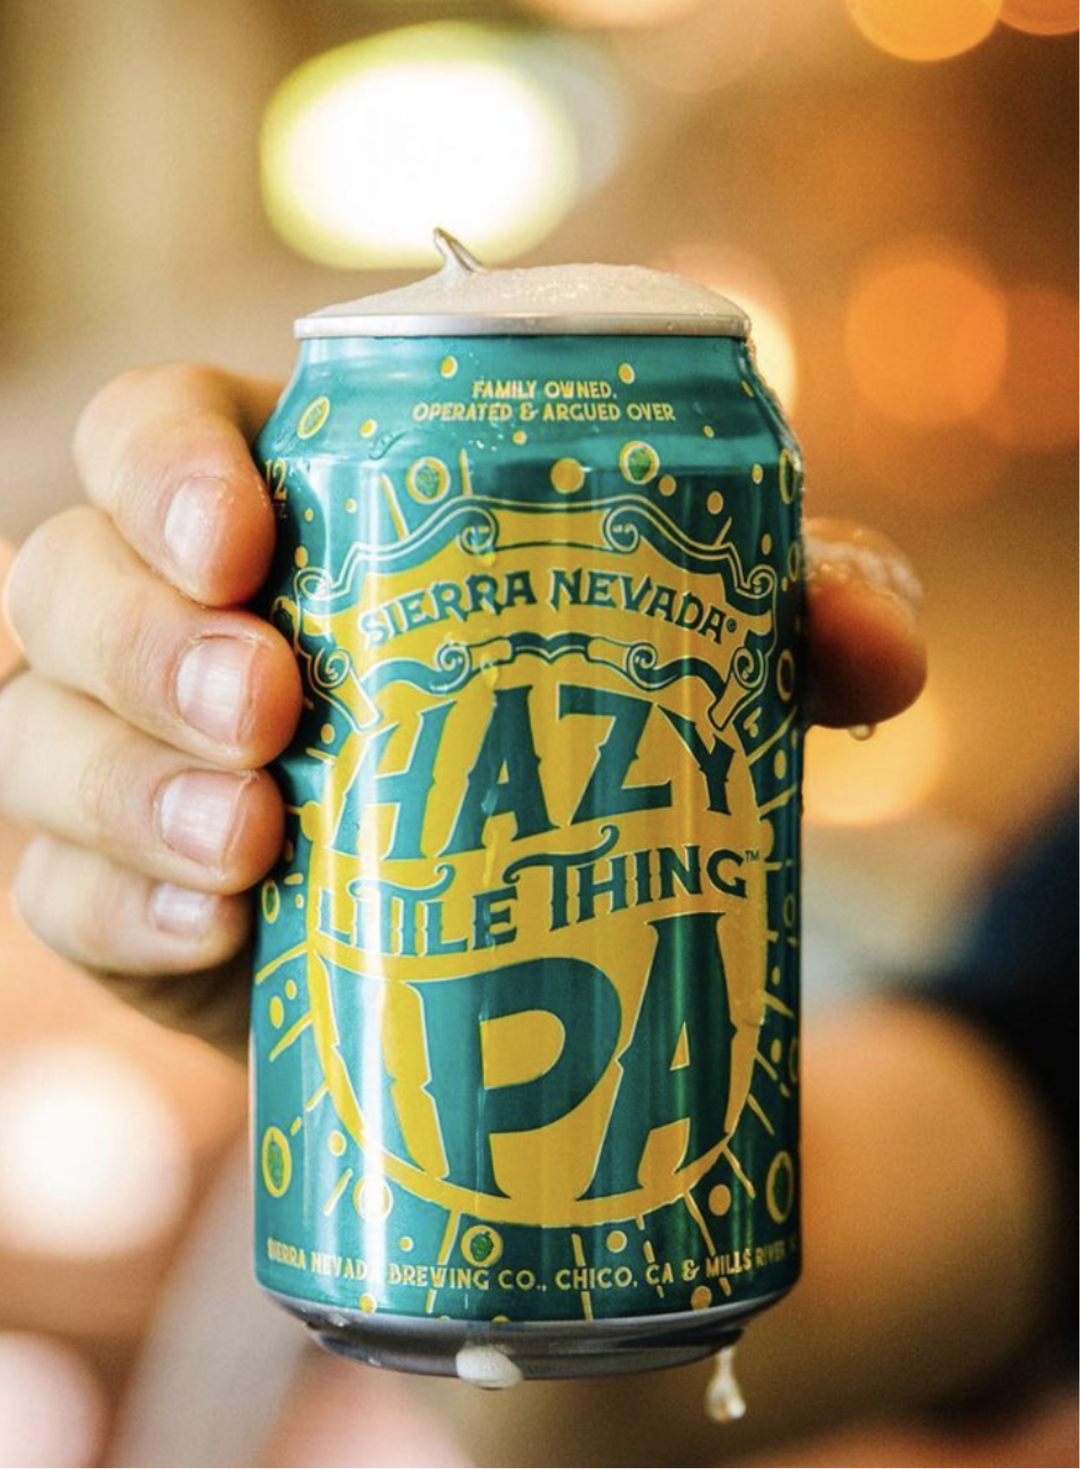 A man's hand holding a can of Hazy Little Thing IPA beer